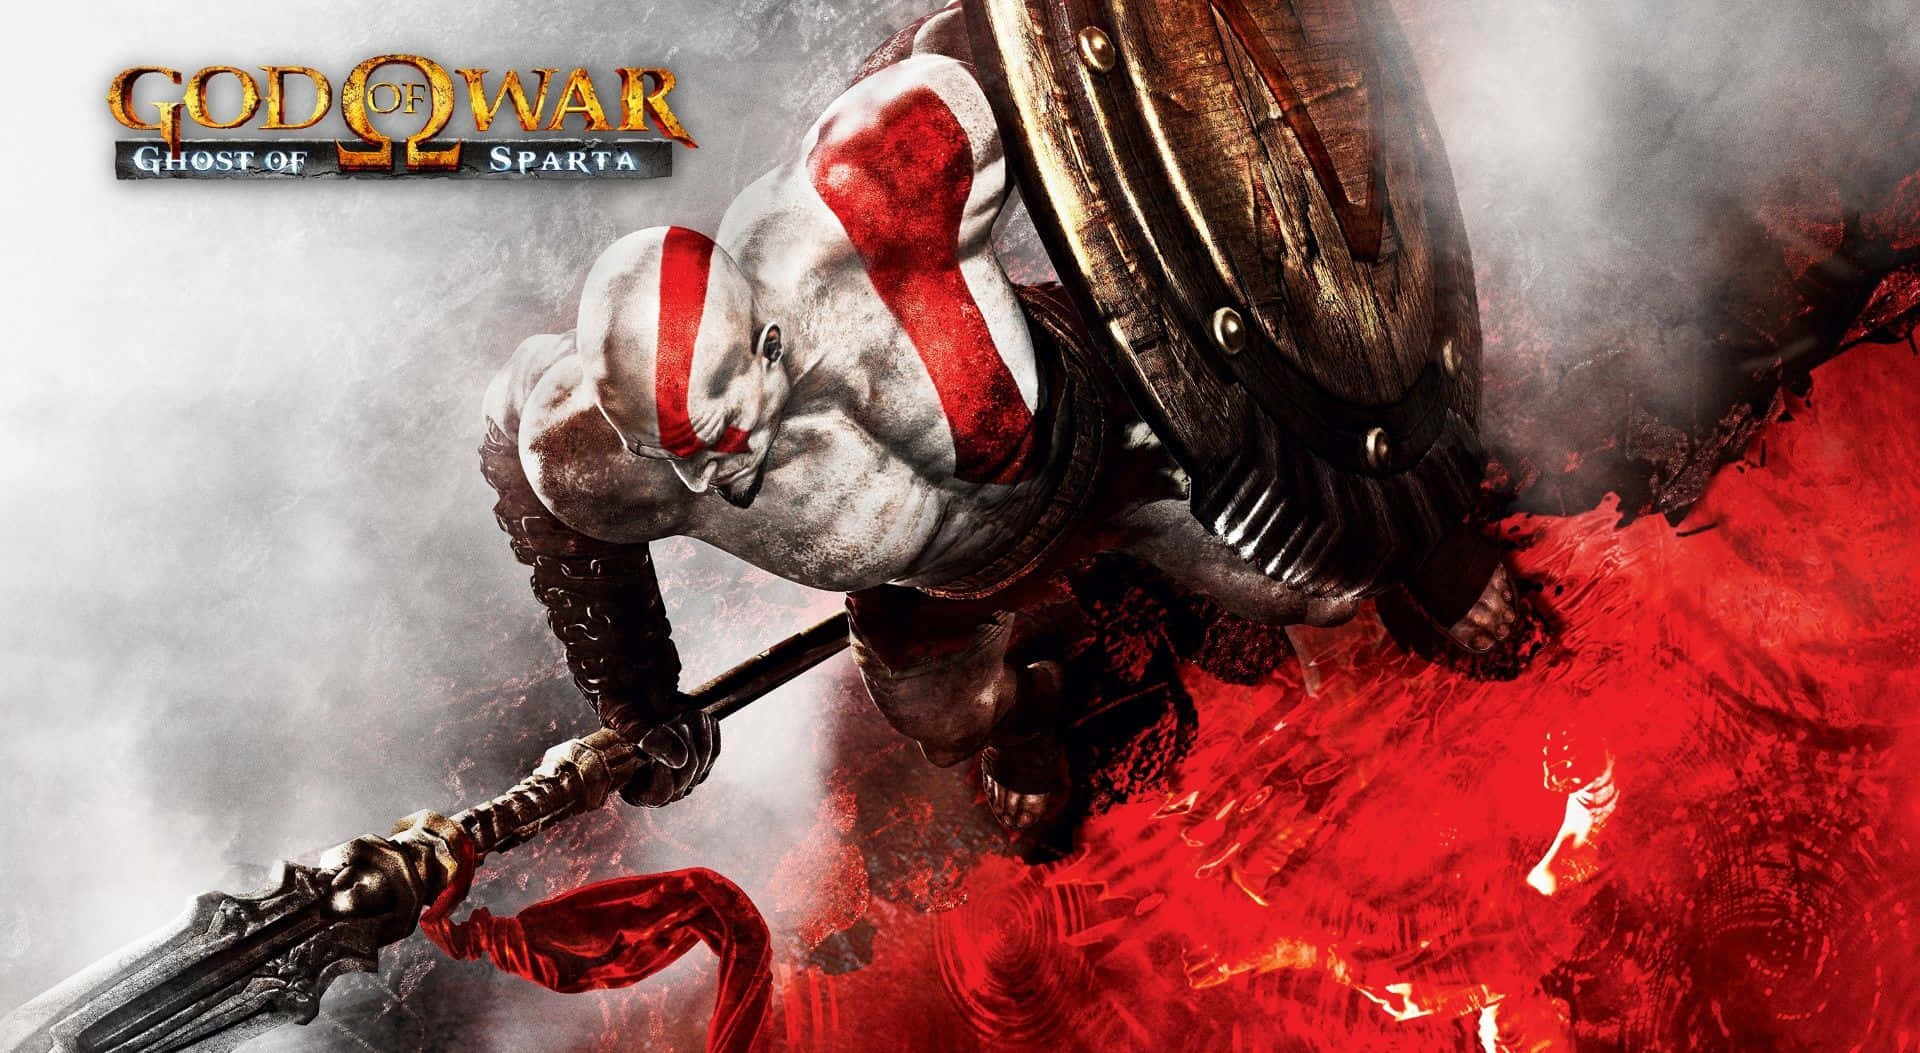 download-the-epic-god-of-war-iii-game-on-playstation-4-wallpaper